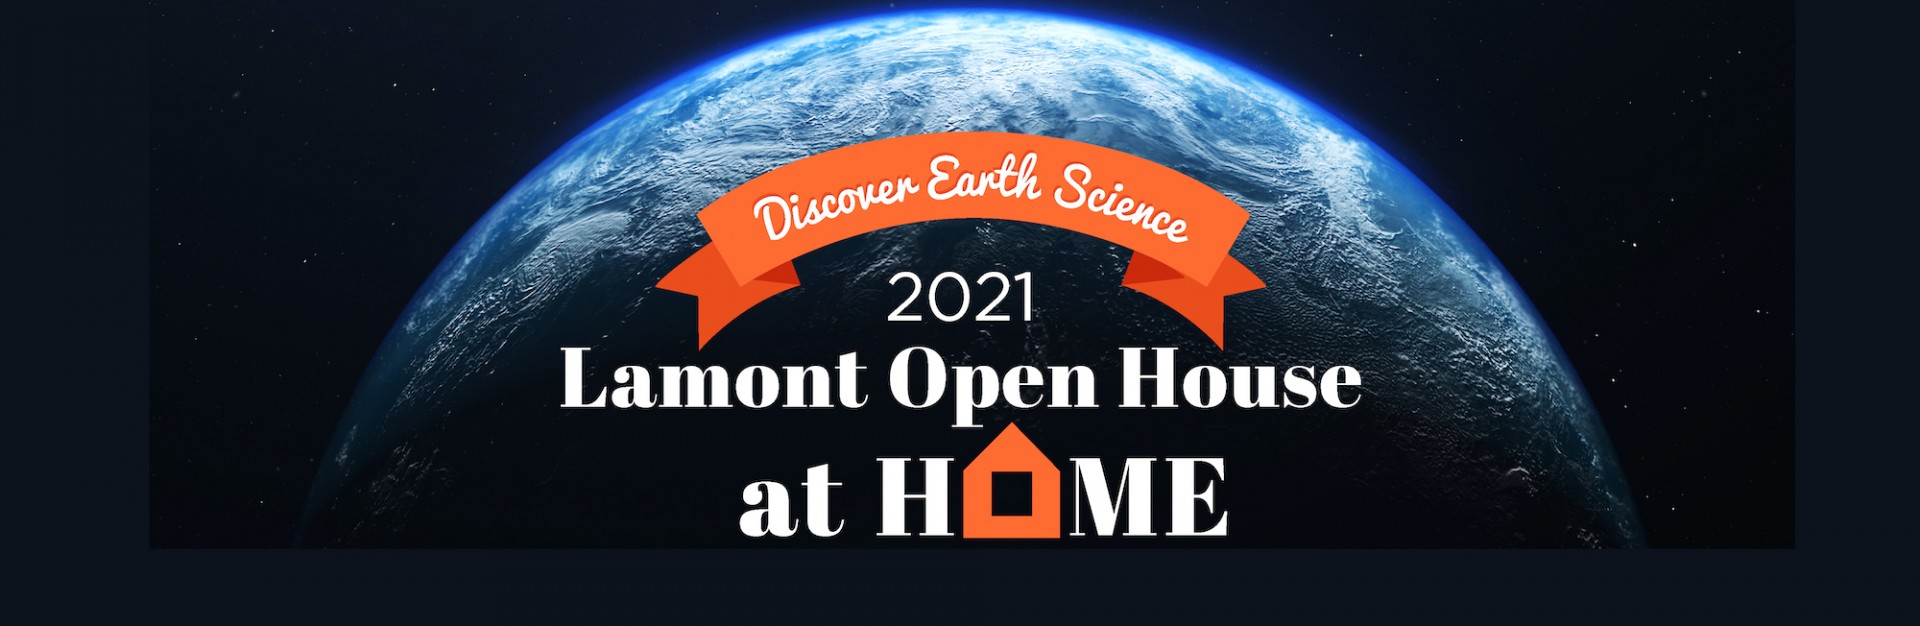 2021 Lamont Open House at Home text over planet view from space